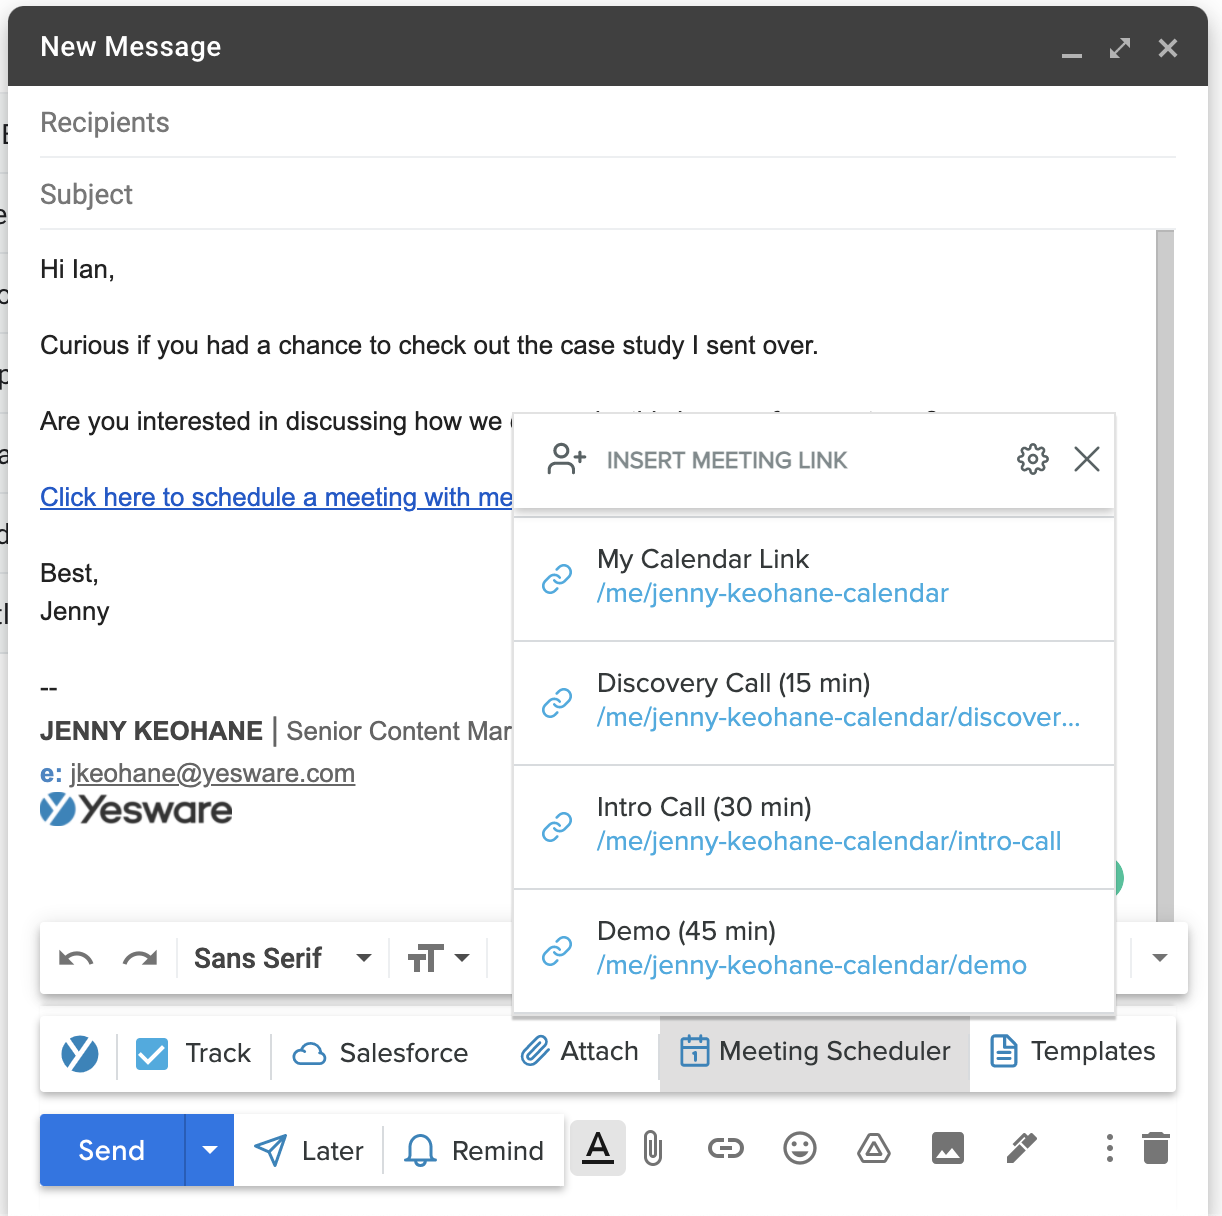 alternatives to say "looking forward to hearing from you" - end email with meeting scheduler link